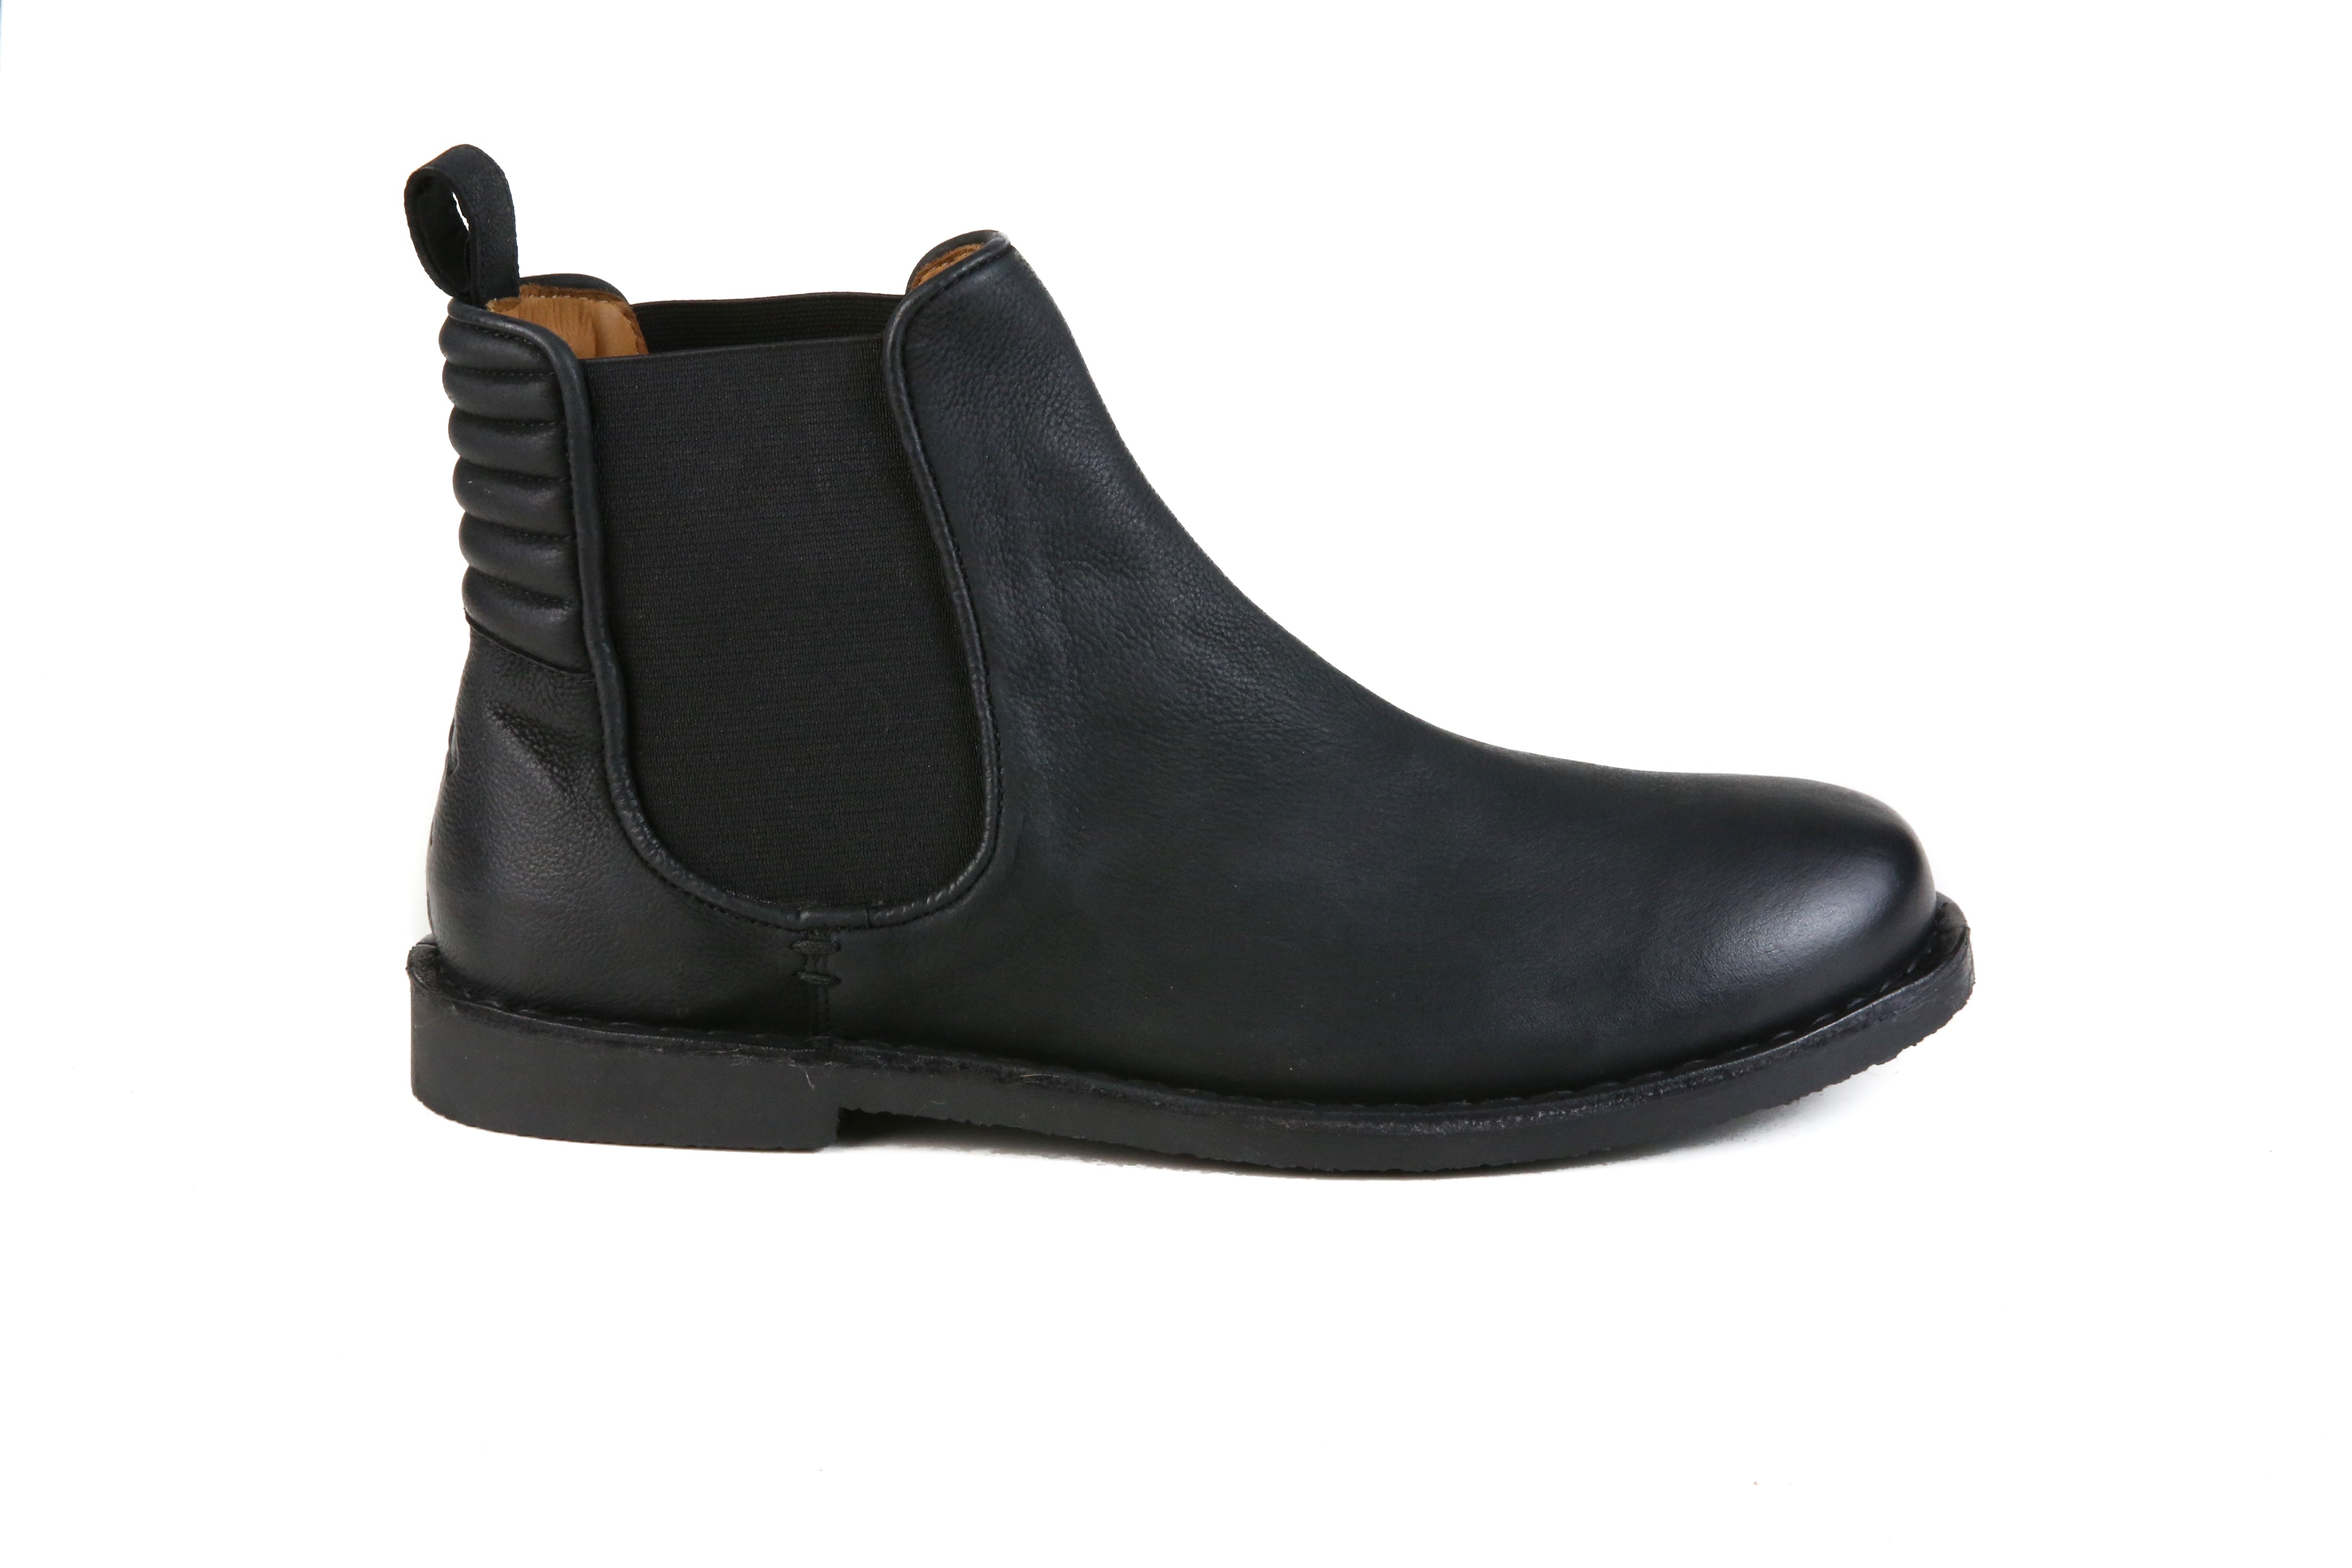 Chelsea Boot - The Gamble | Black - Hound and Hammer Boots